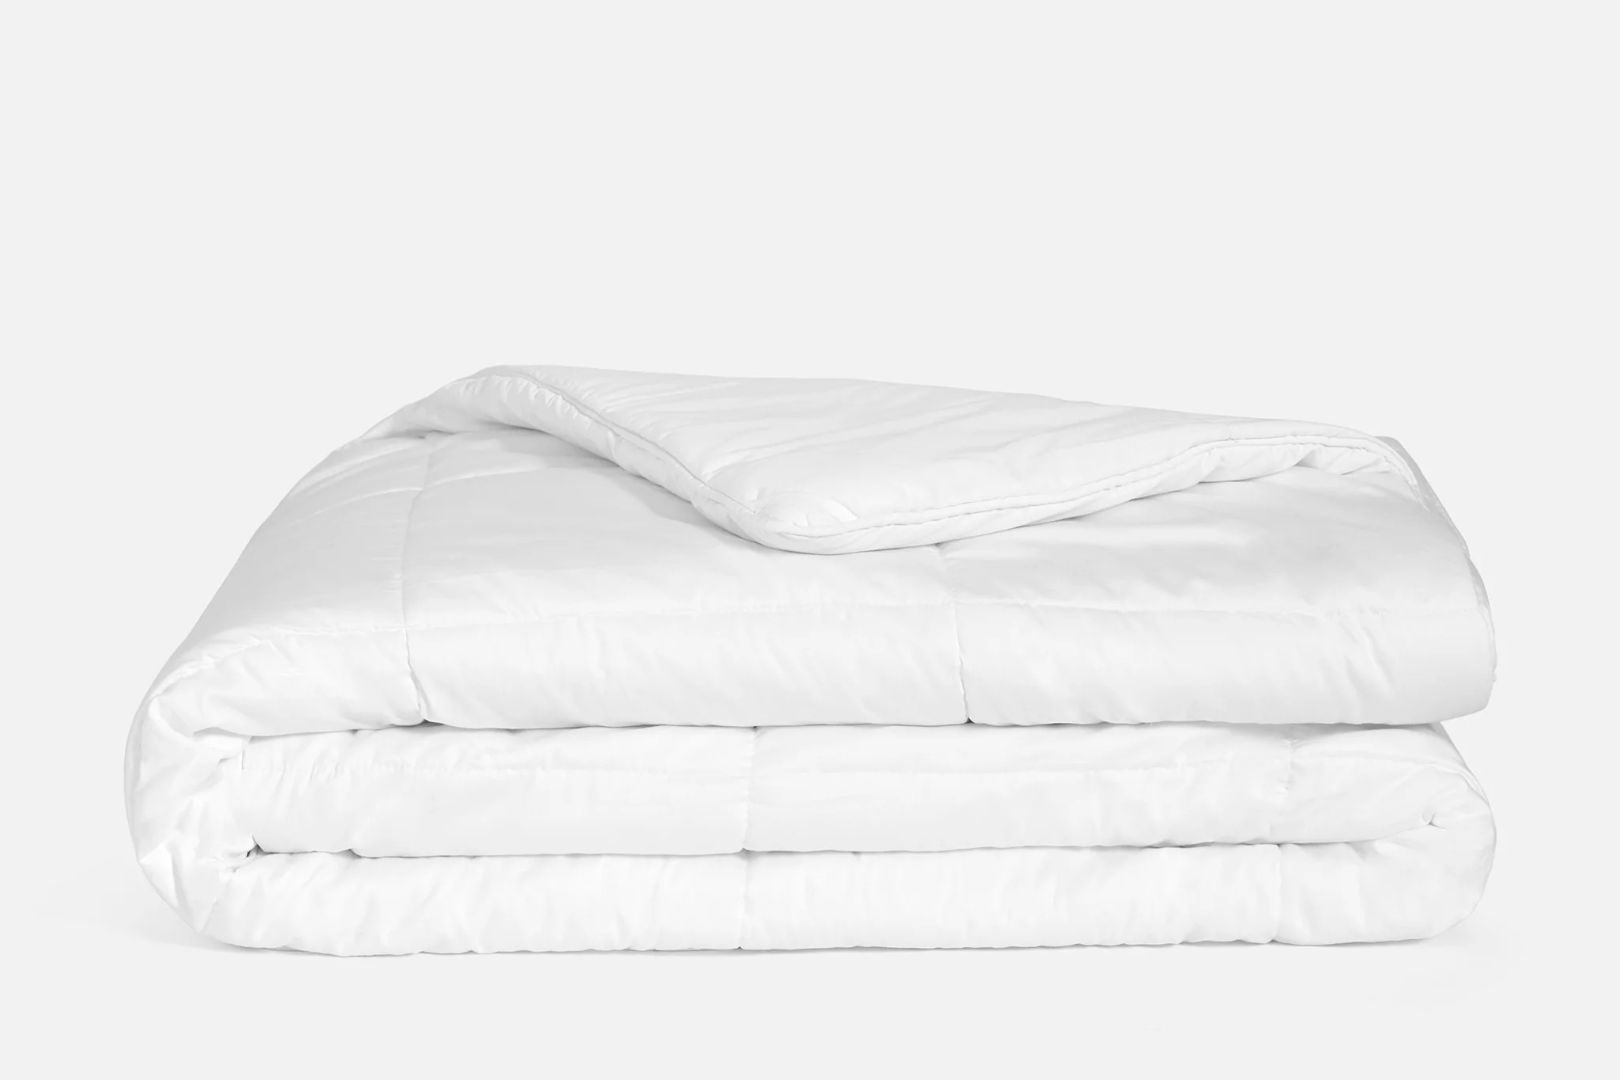 A solid white Brooklinen Weighted Comforter neatly folded on a white surface.